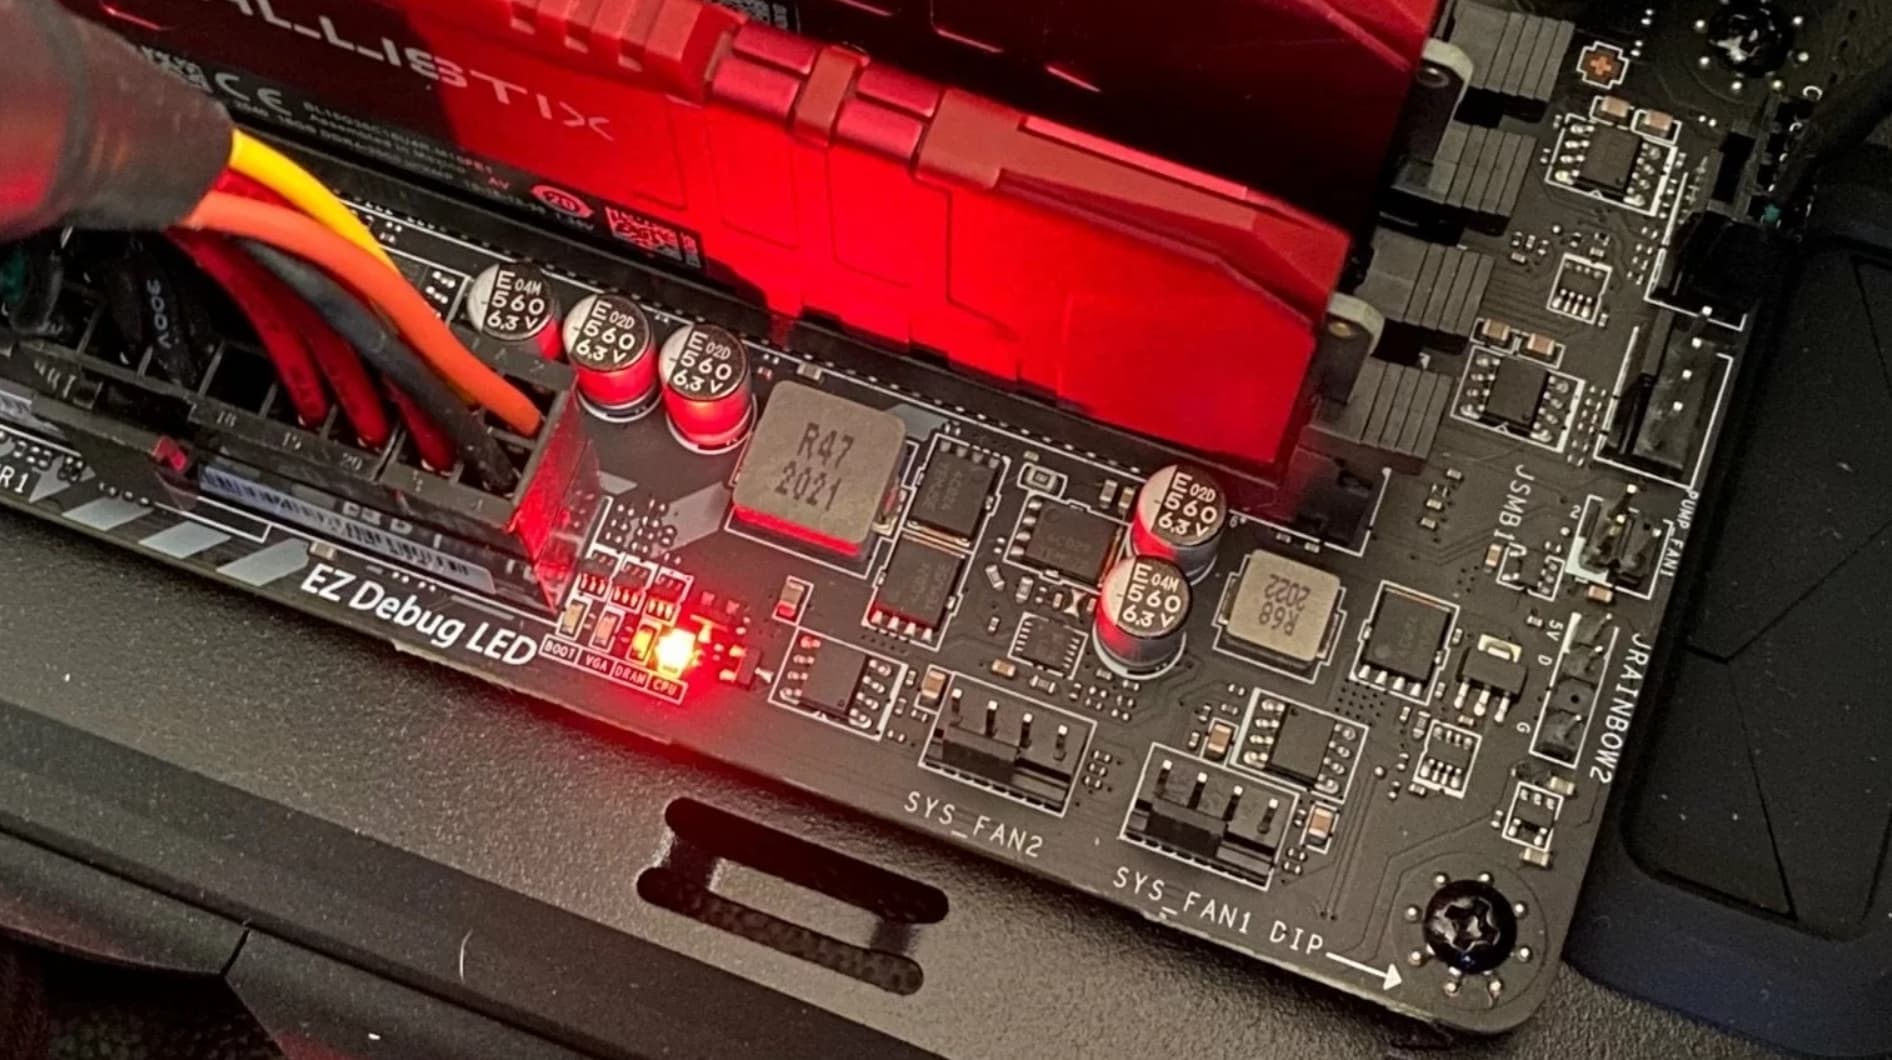 Inspect all hardware components for any visible damage or loose connections.
Remove and reseat RAM modules, ensuring they are properly inserted.